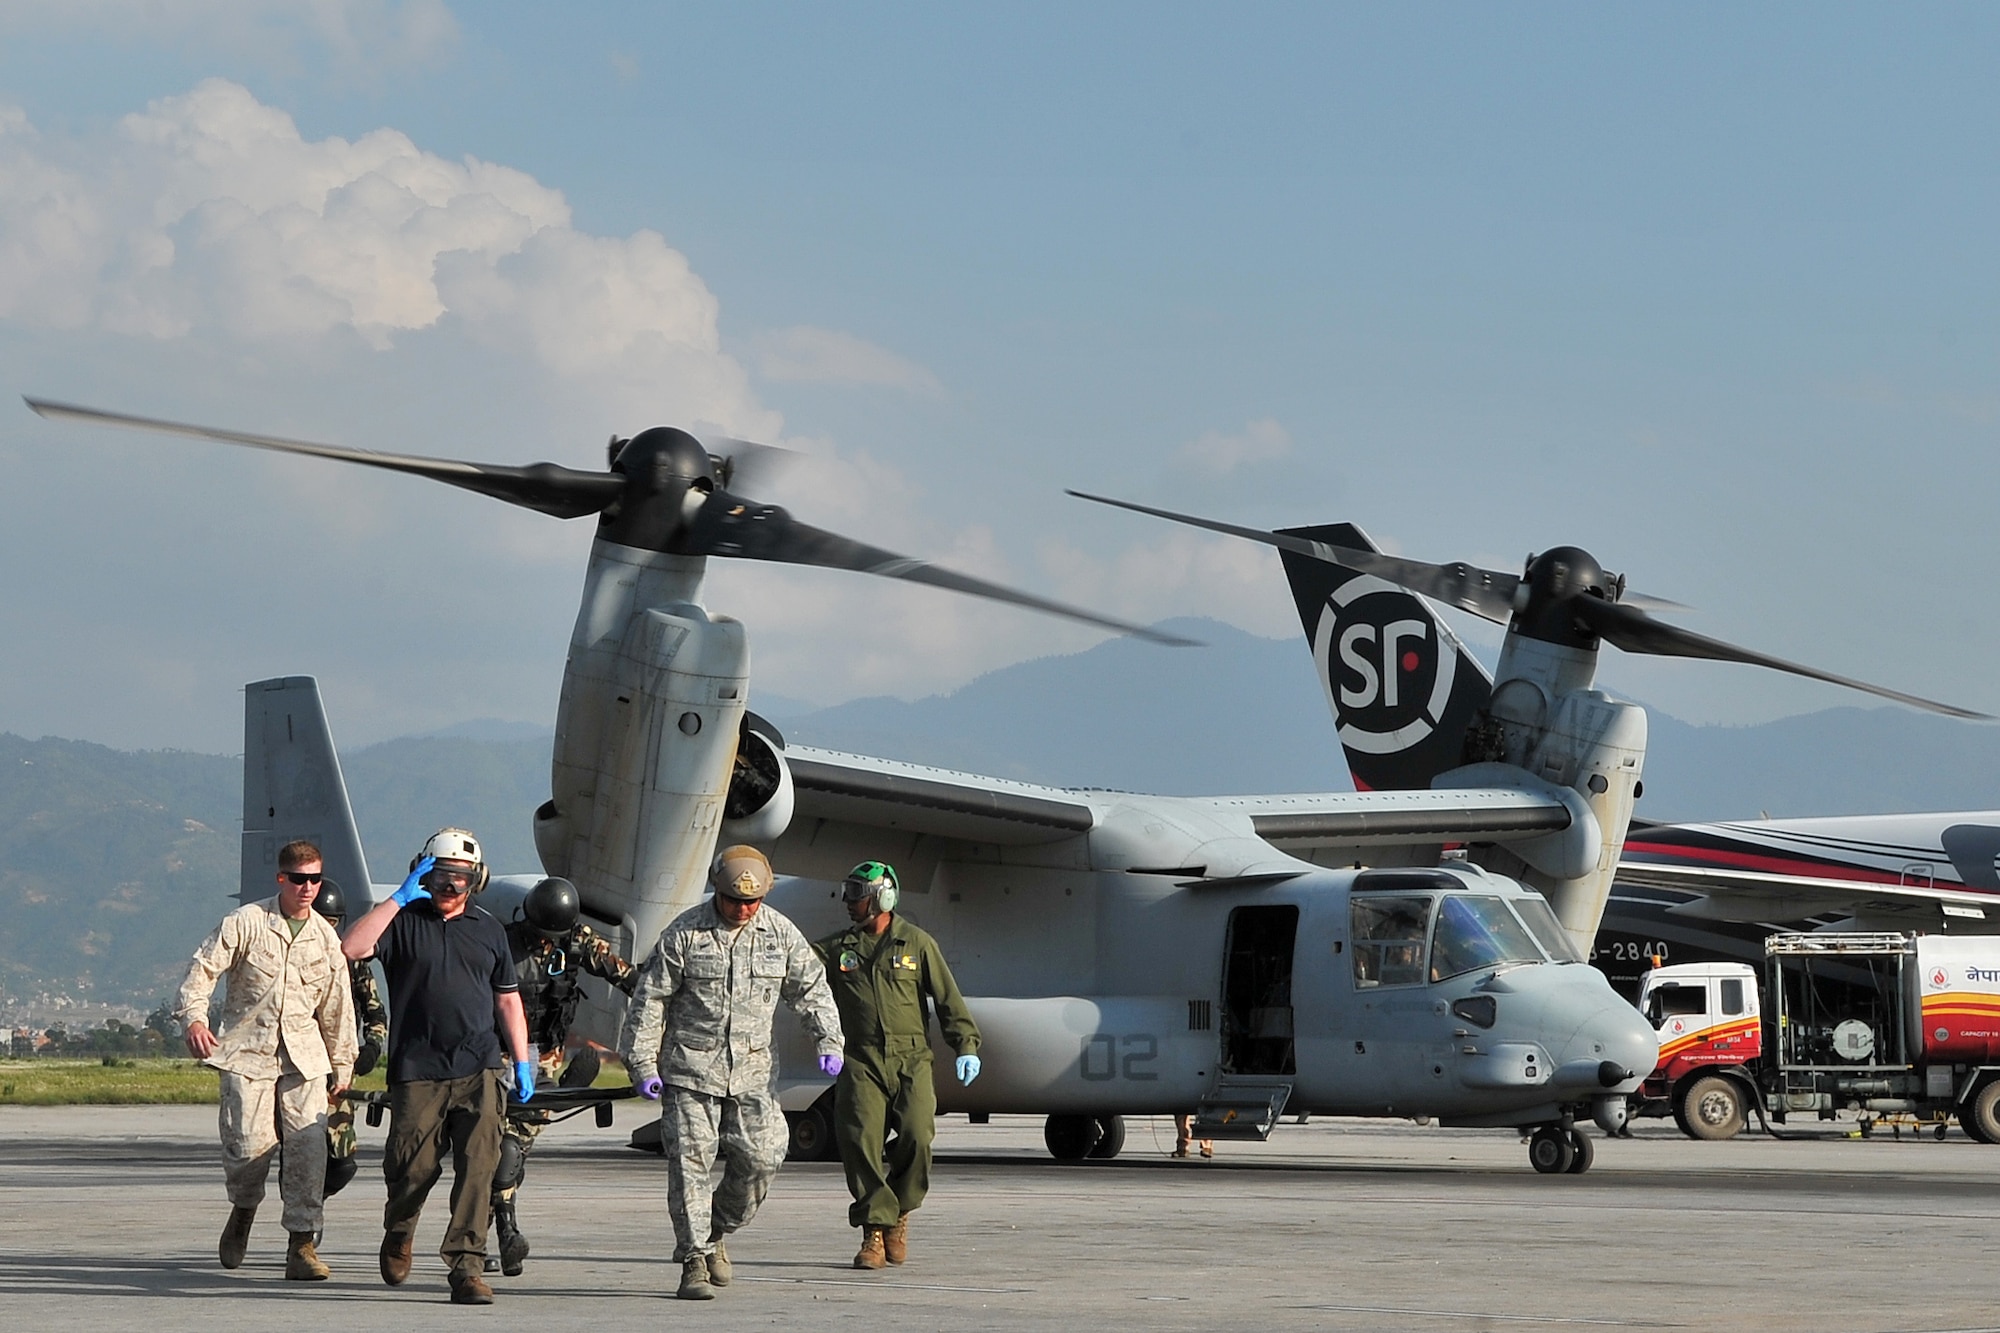 Airmen, Marines and Nepalese army soldiers transport an earthquake patient from an MV-22 Osprey for medical care at the Tribhuvan International Airport in Kathmandu, Nepal, May 12, 2015. The Joint Task Force-505 members worked with the Nepalese army to triage, treat and transport patients after a 7.3-magnitude earthquake struck the region, following a 7.8-magnitude quake that devastated the nation April 25. (U.S. Air Force photo/Staff Sgt. Melissa B. White)